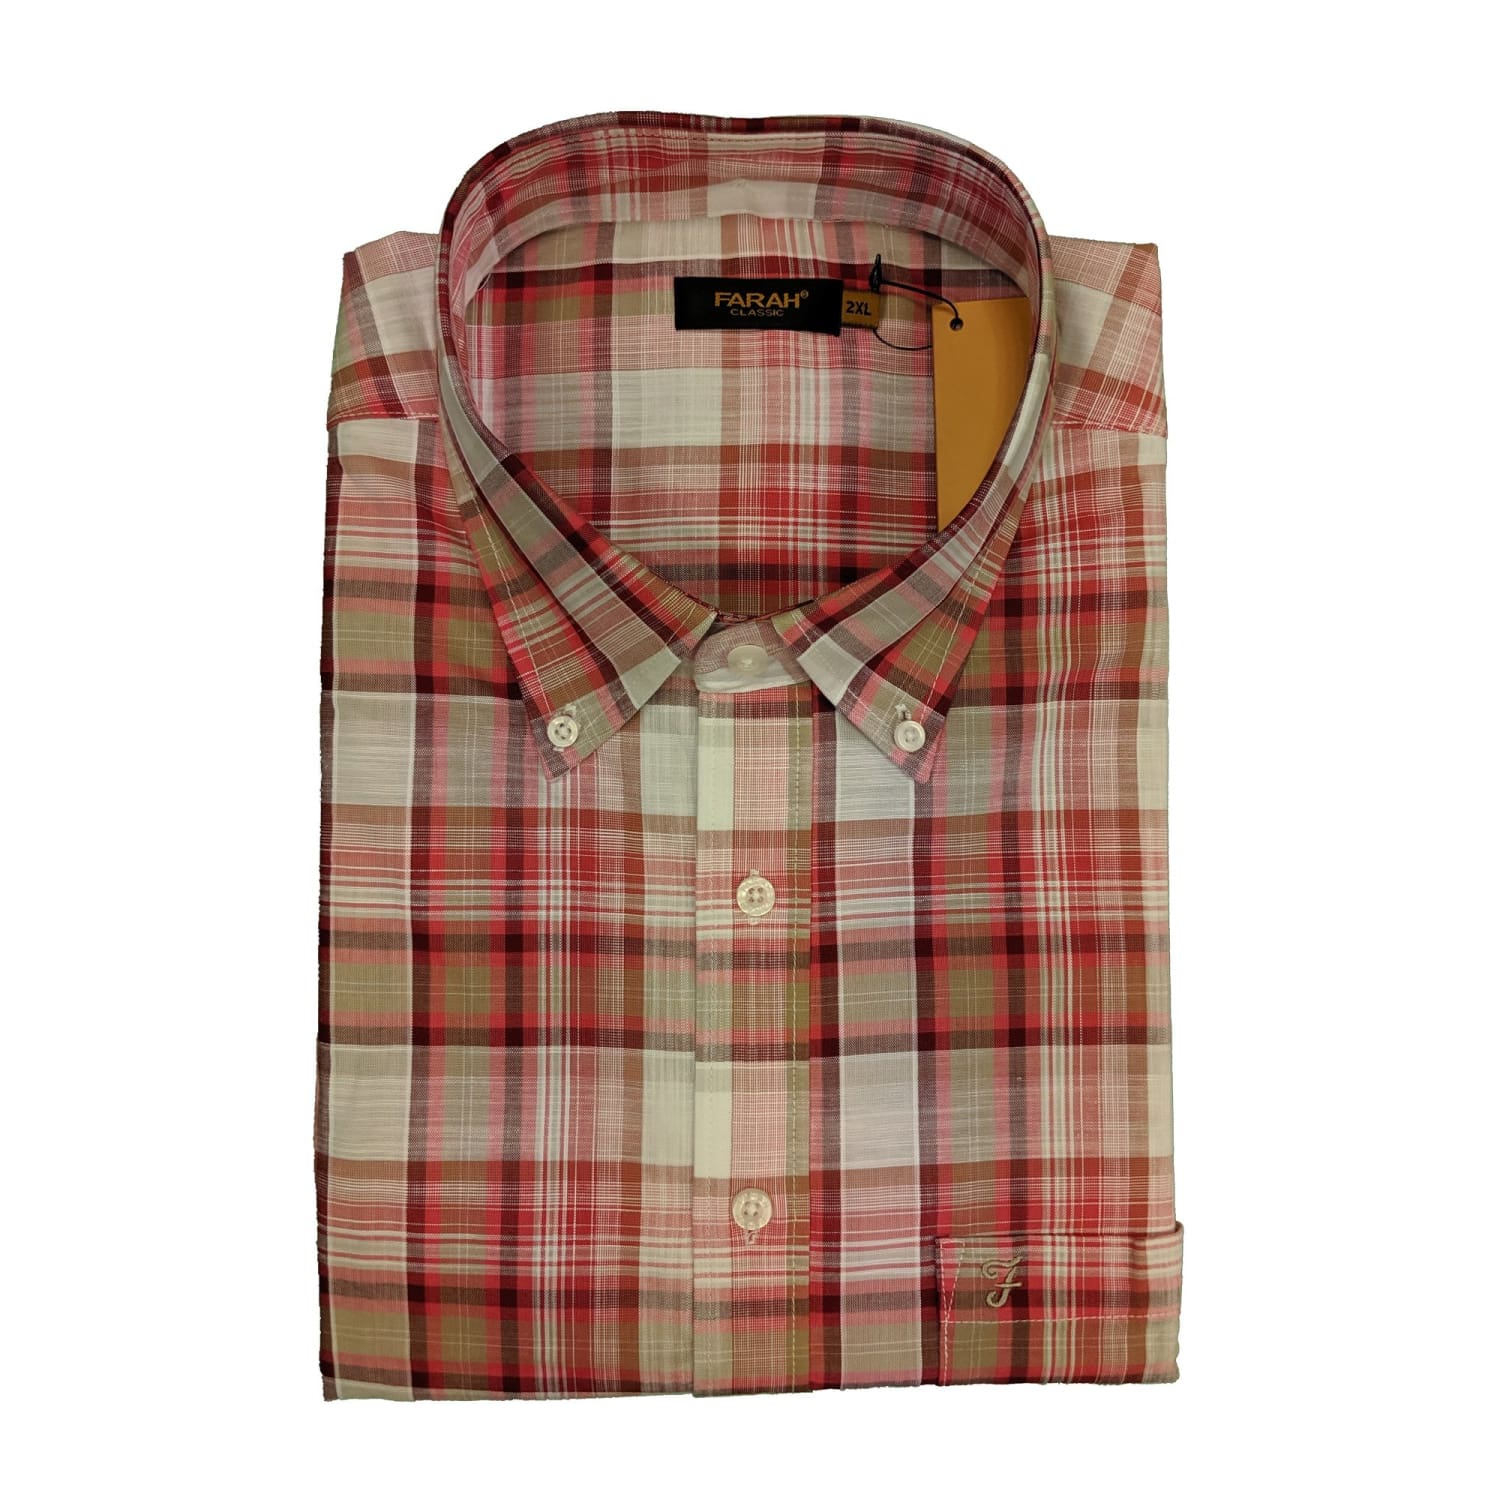 Farah S/S Shirt - FAWS6030GP - Bissit - Red Check 1